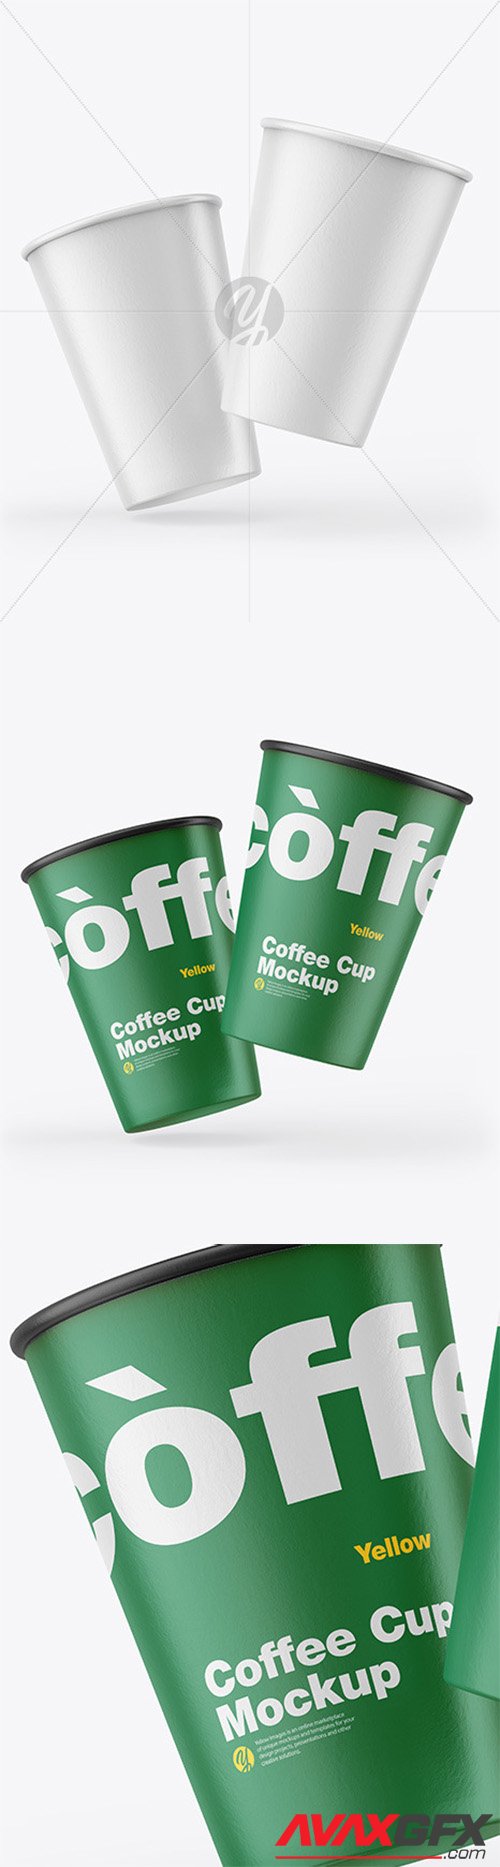 Download Matte Coffee Cups Mockup 55462 Avaxgfx All Downloads That You Need In One Place Graphic From Nitroflare Rapidgator Yellowimages Mockups